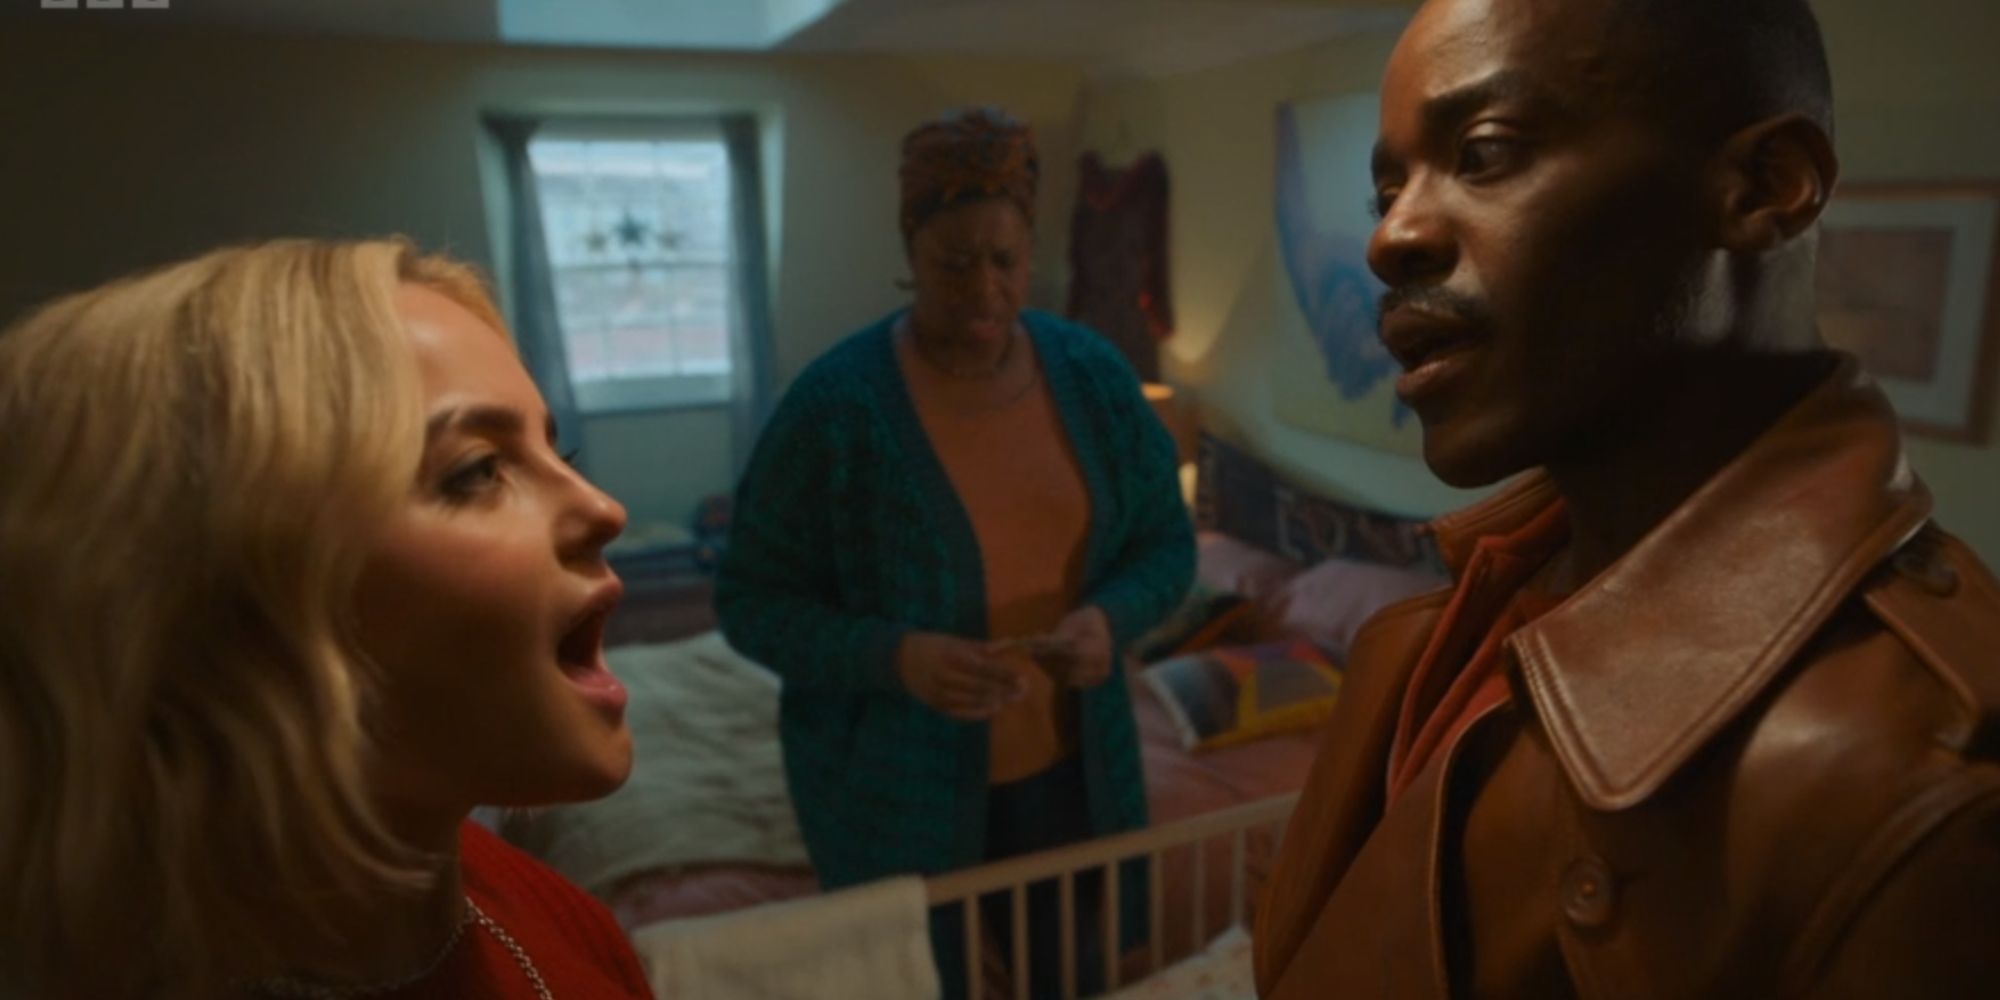 Millie Gibson and Ncuti Gatwa talking in Ruby's house with Michelle Greenidge in the background in the Doctor Who seasonal special